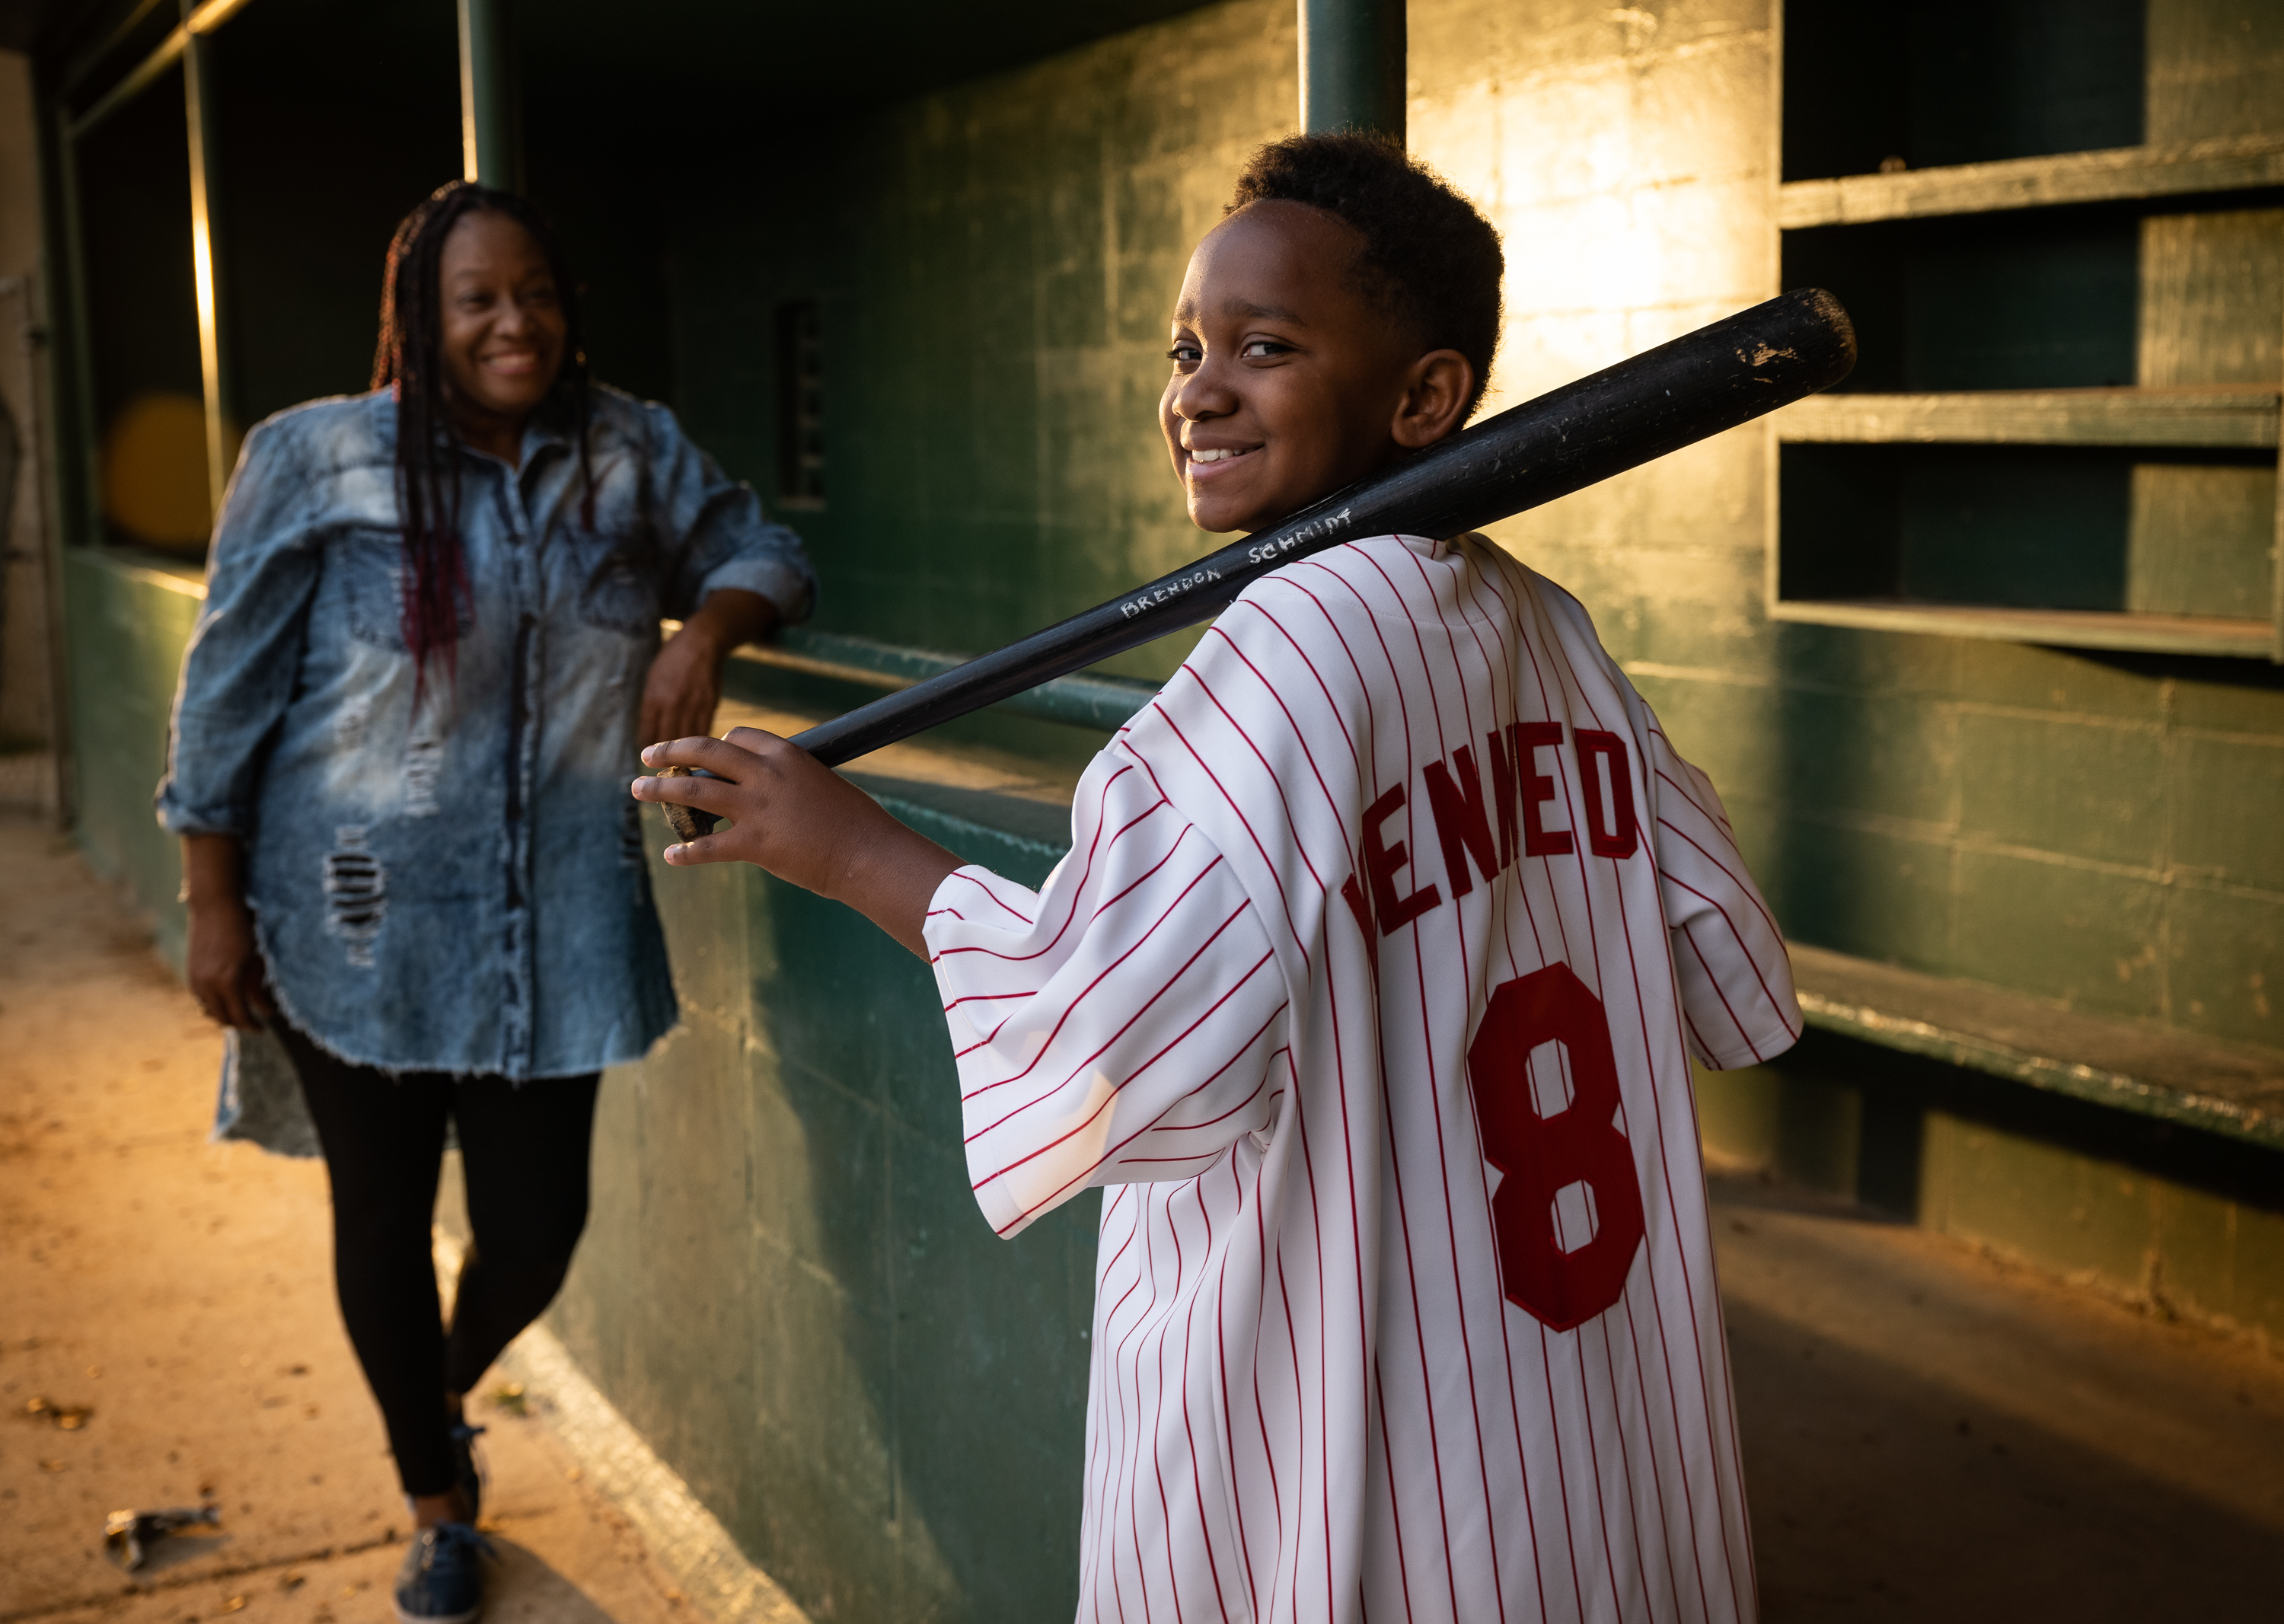 The story of John Kennedy, the Phillies' forgotten first black player